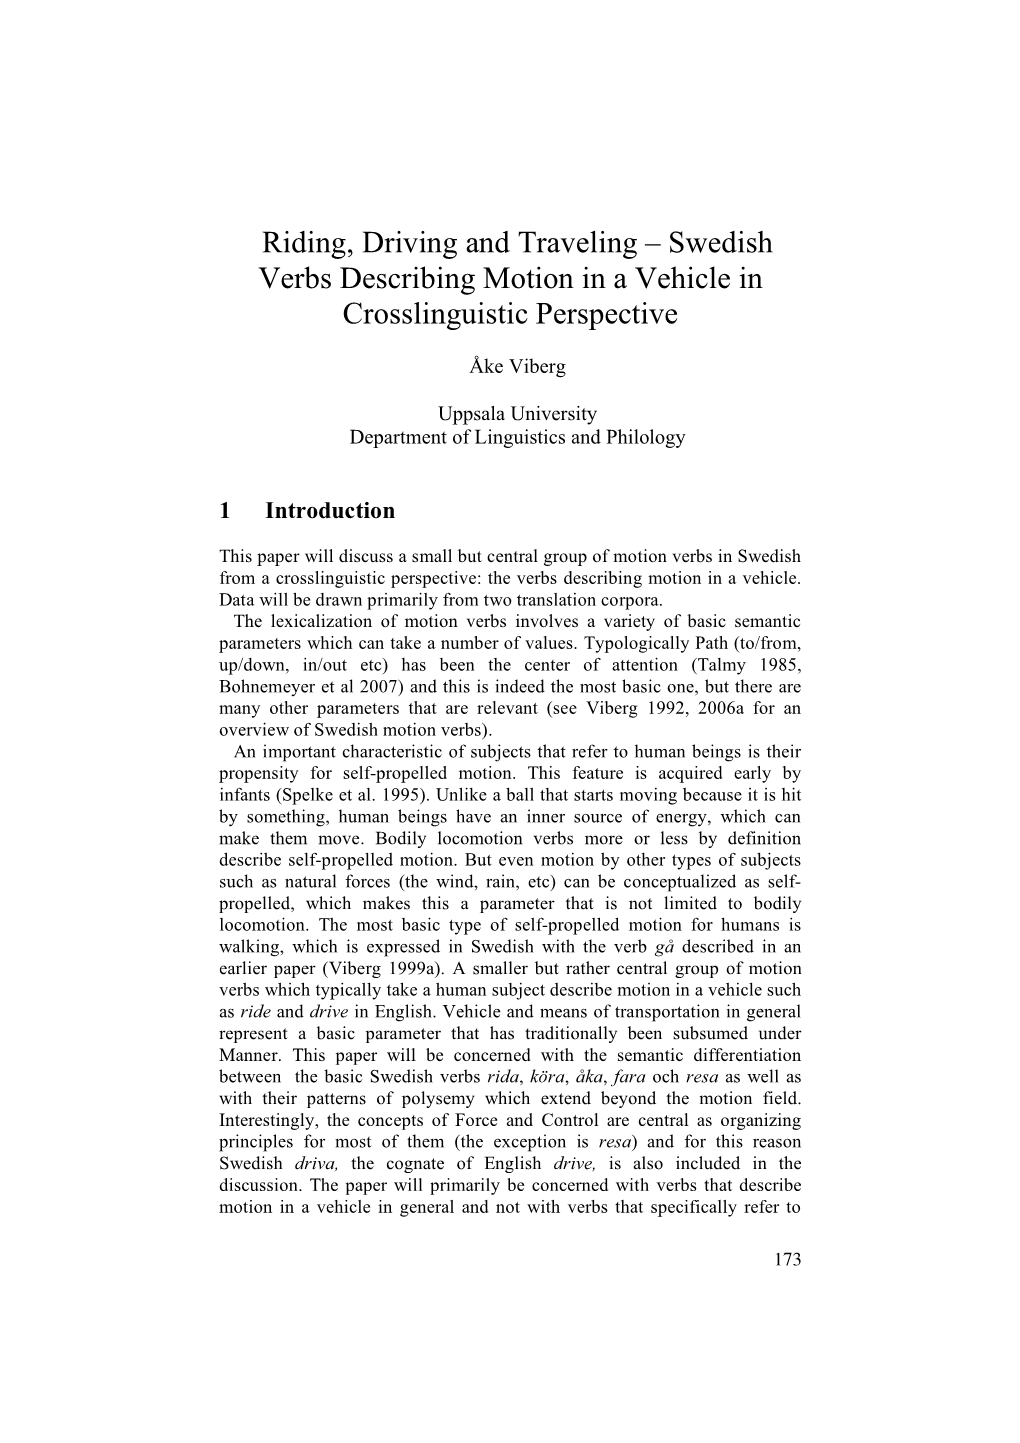 Riding, Driving and Traveling – Swedish Verbs Describing Motion in a Vehicle in Crosslinguistic Perspective